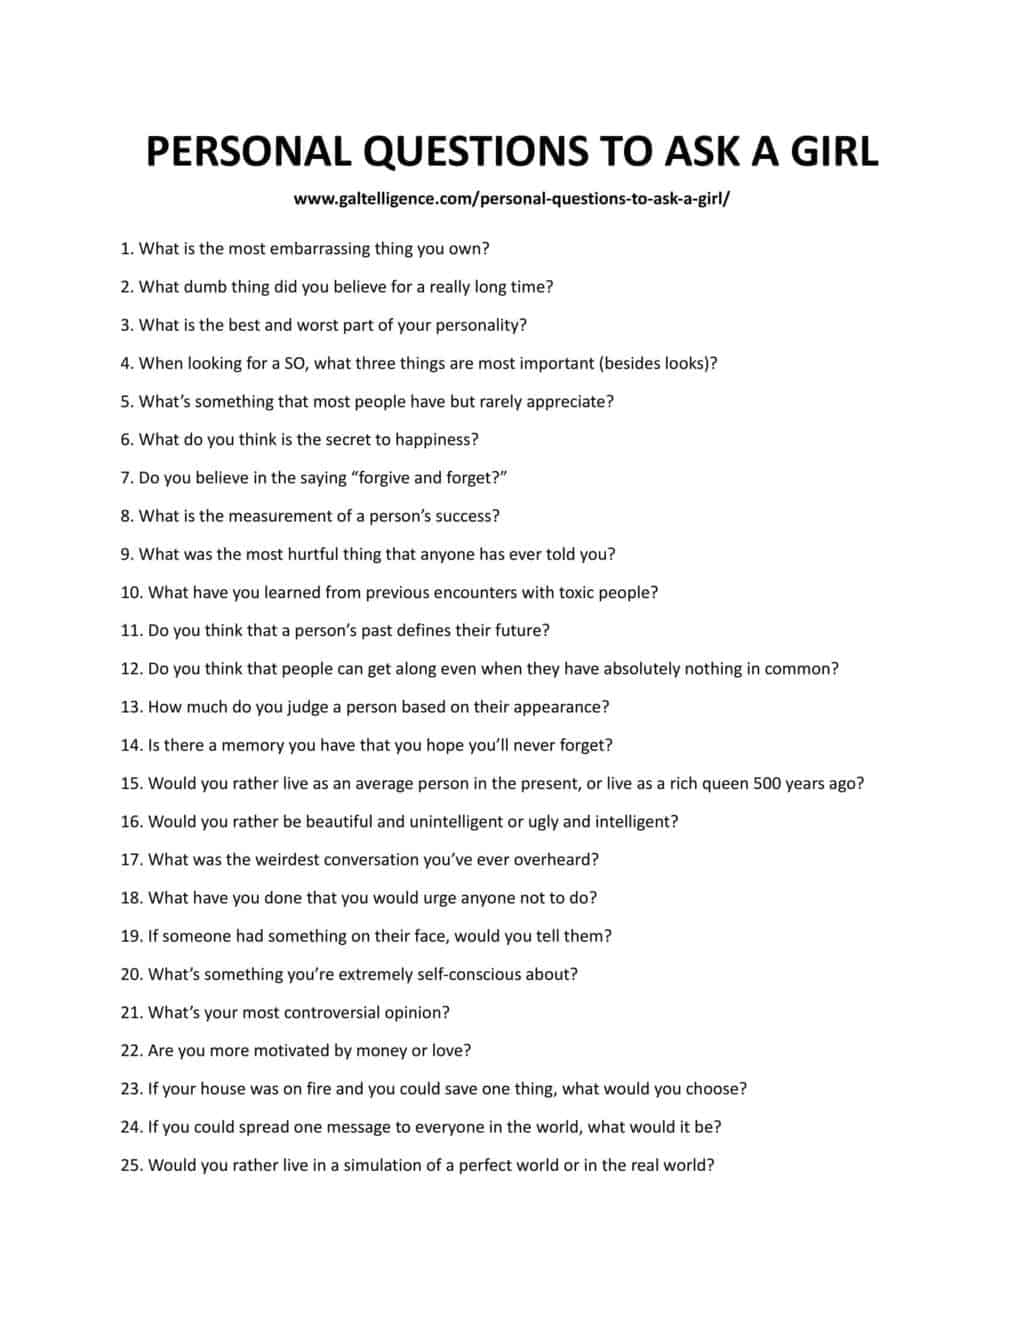 Printable and downloadable list - Personal questions to ask a girl